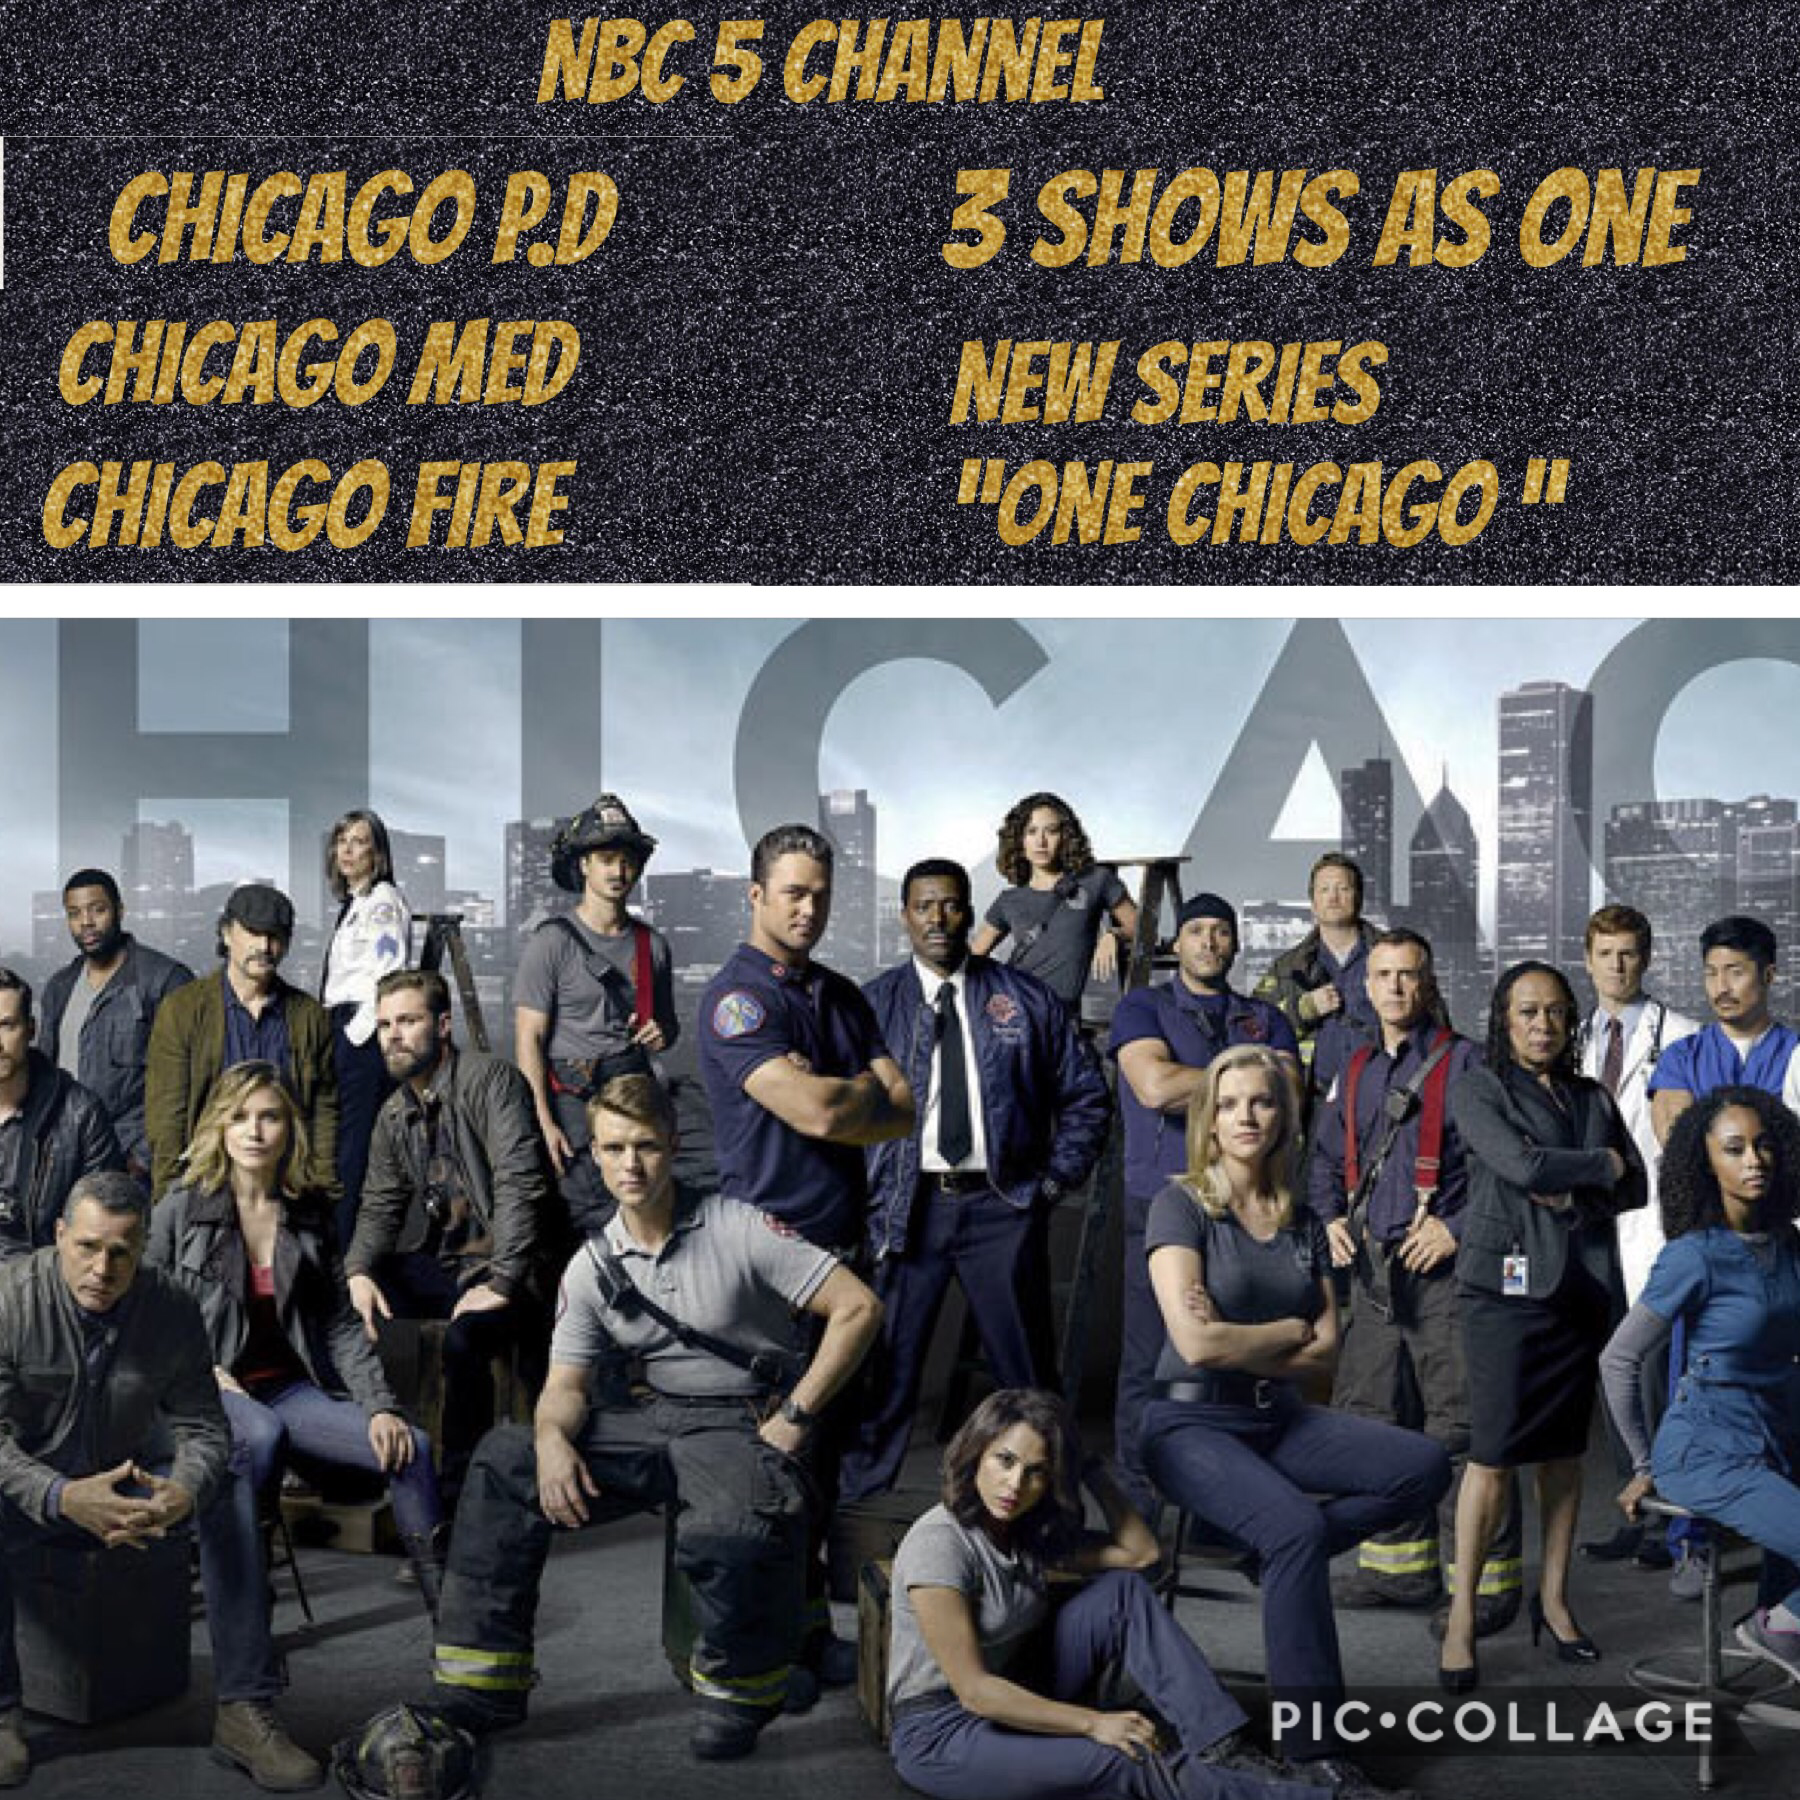 Chicago fire, Chicago p.d, and Chicago med